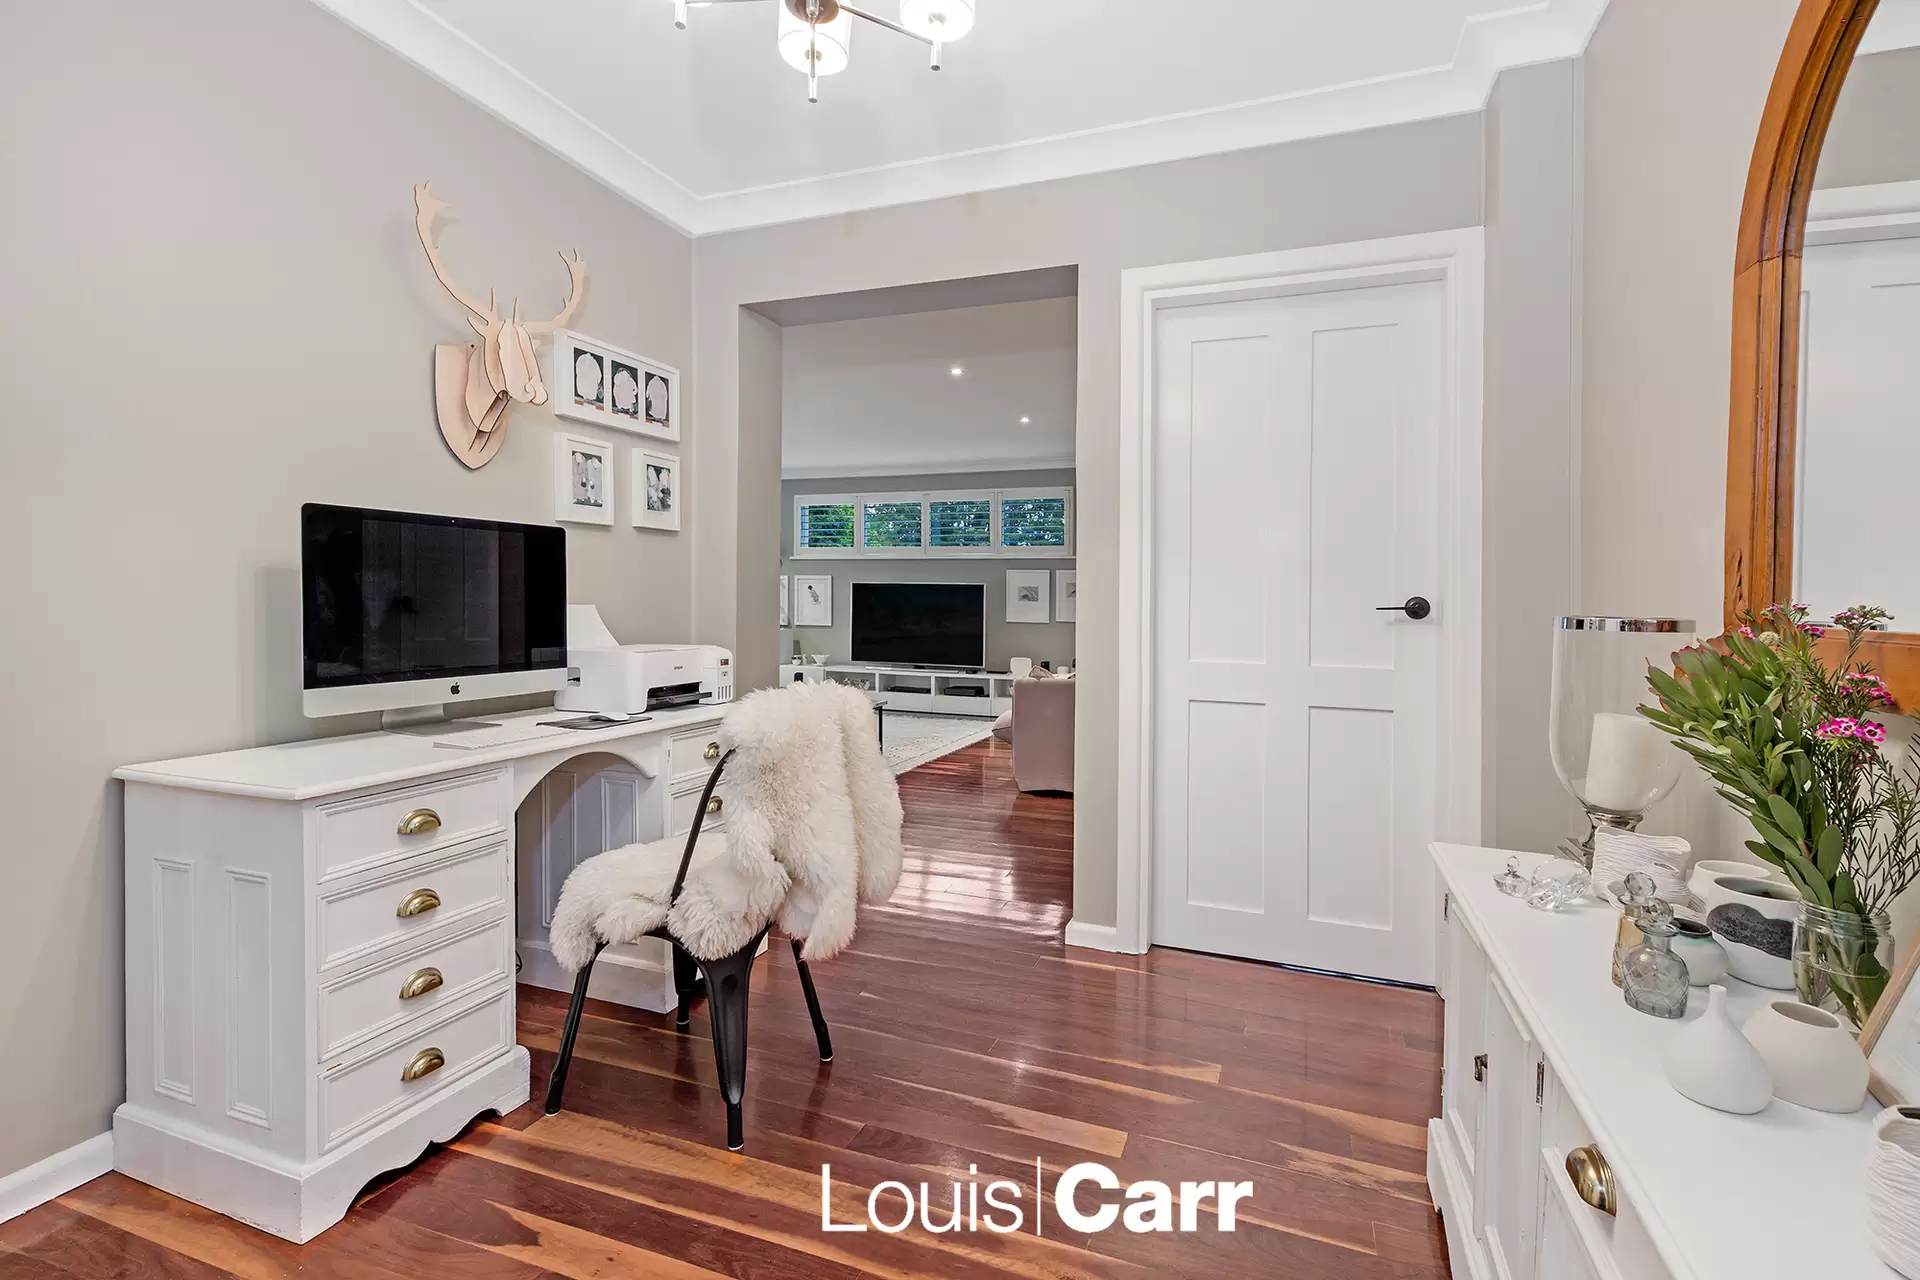 Photo #7: 47 Cambewarra Avenue, Castle Hill - For Sale by Louis Carr Real Estate